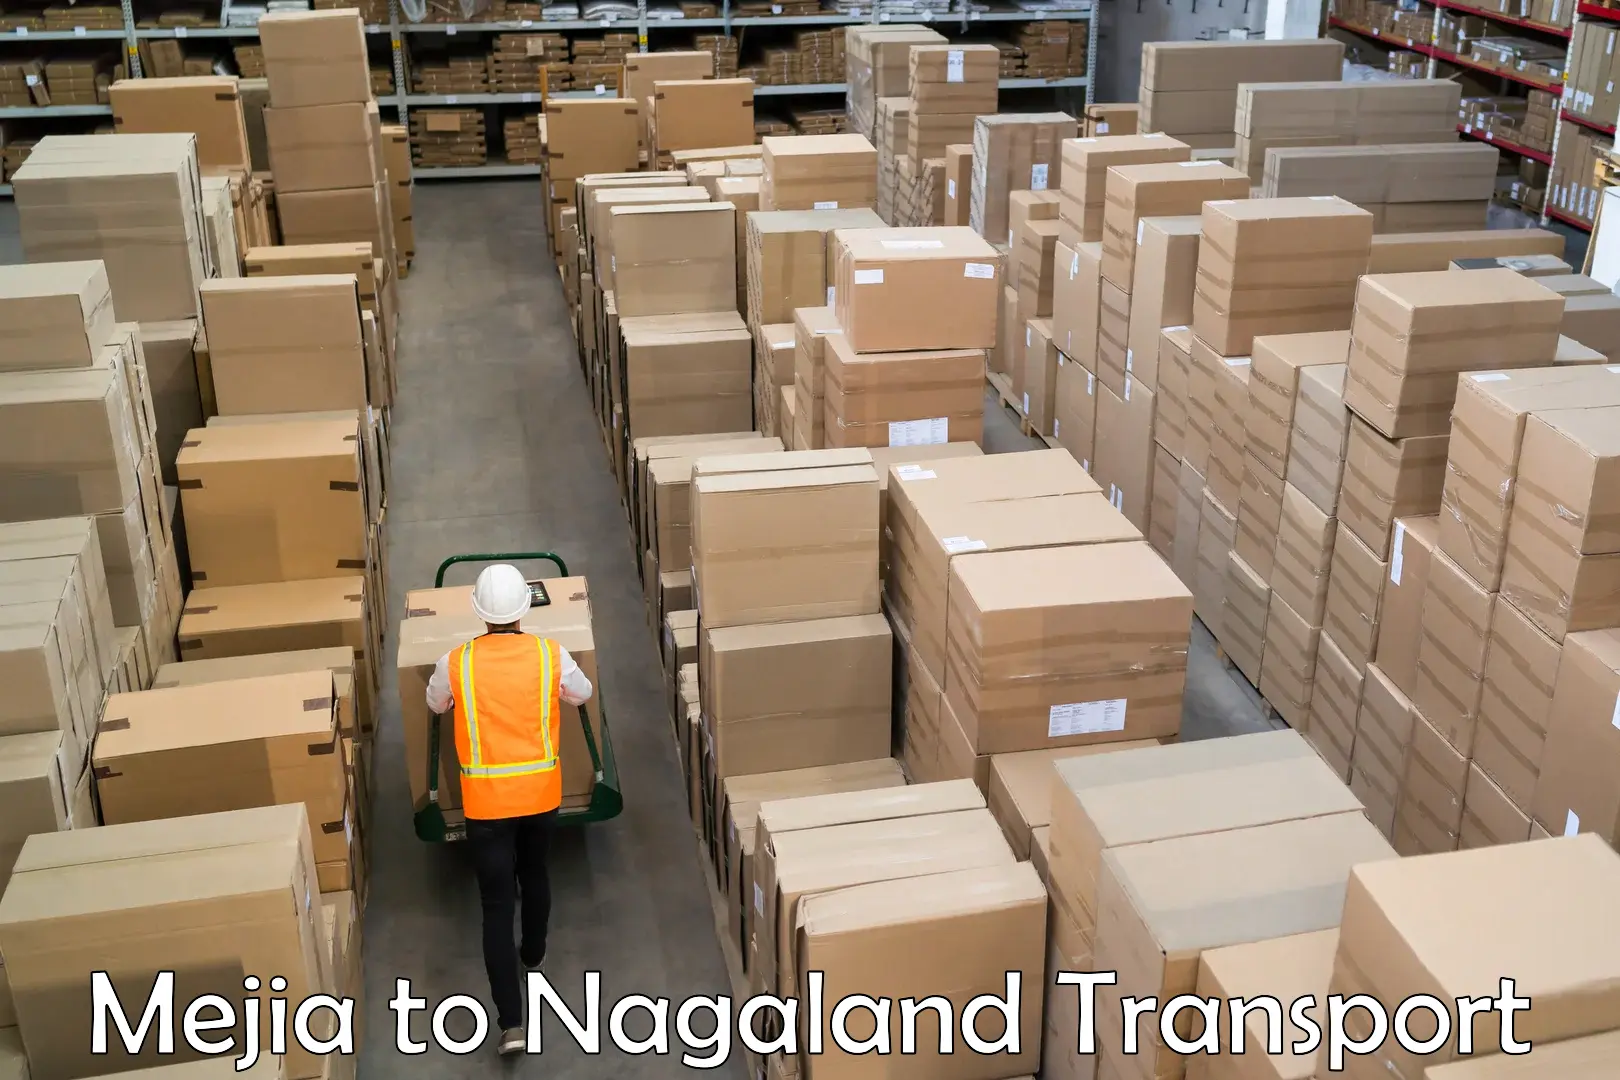 Delivery service Mejia to Nagaland